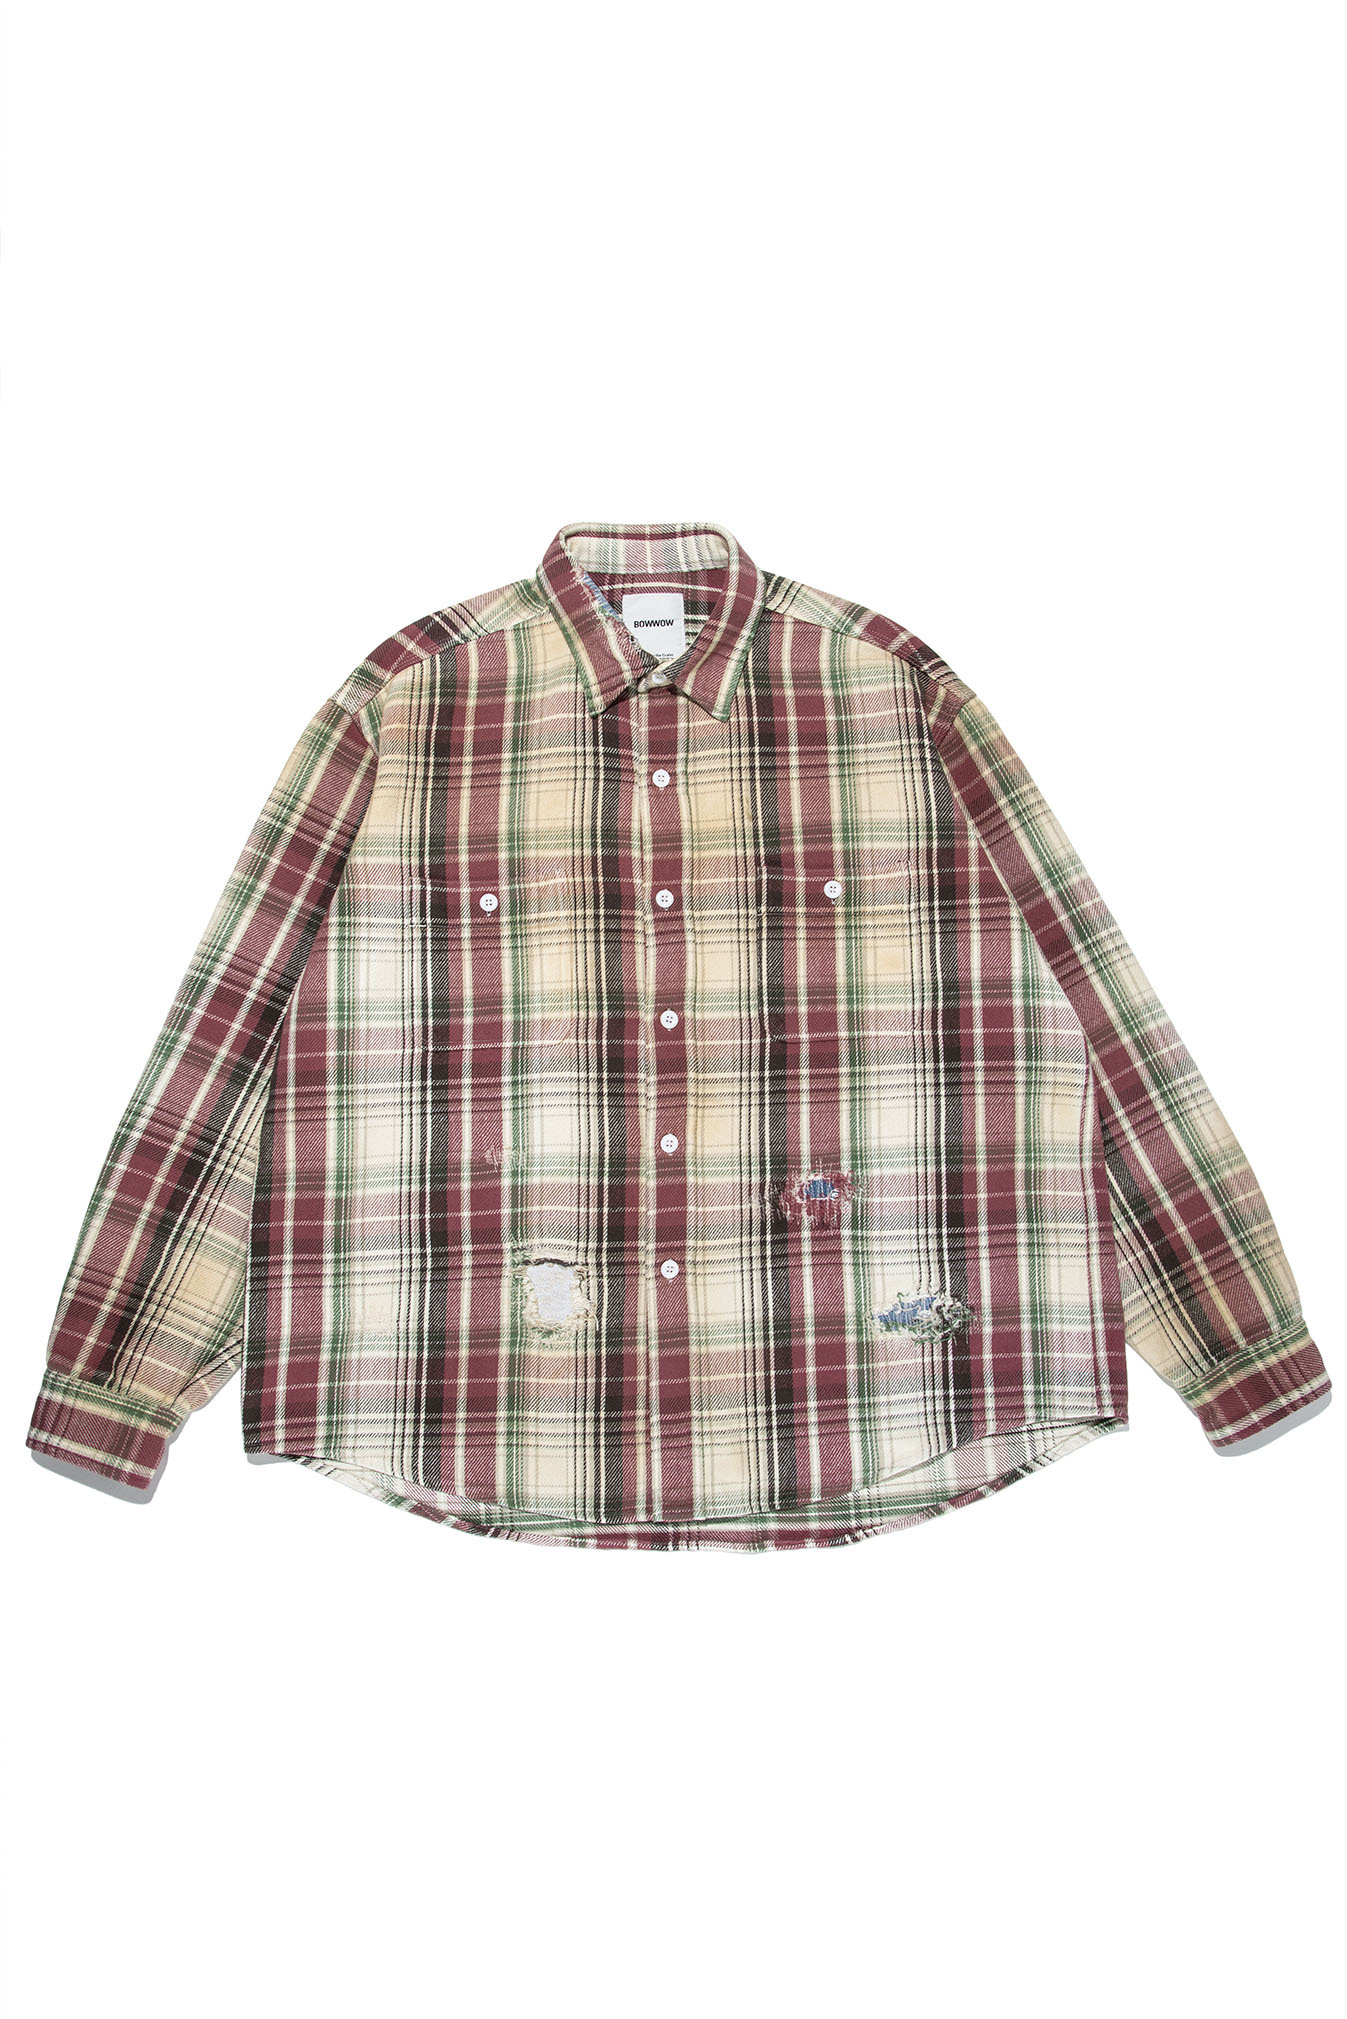 BOW WOW - REPAIRED FLANNEL SHIRTS KING SIZE / 3COLORS